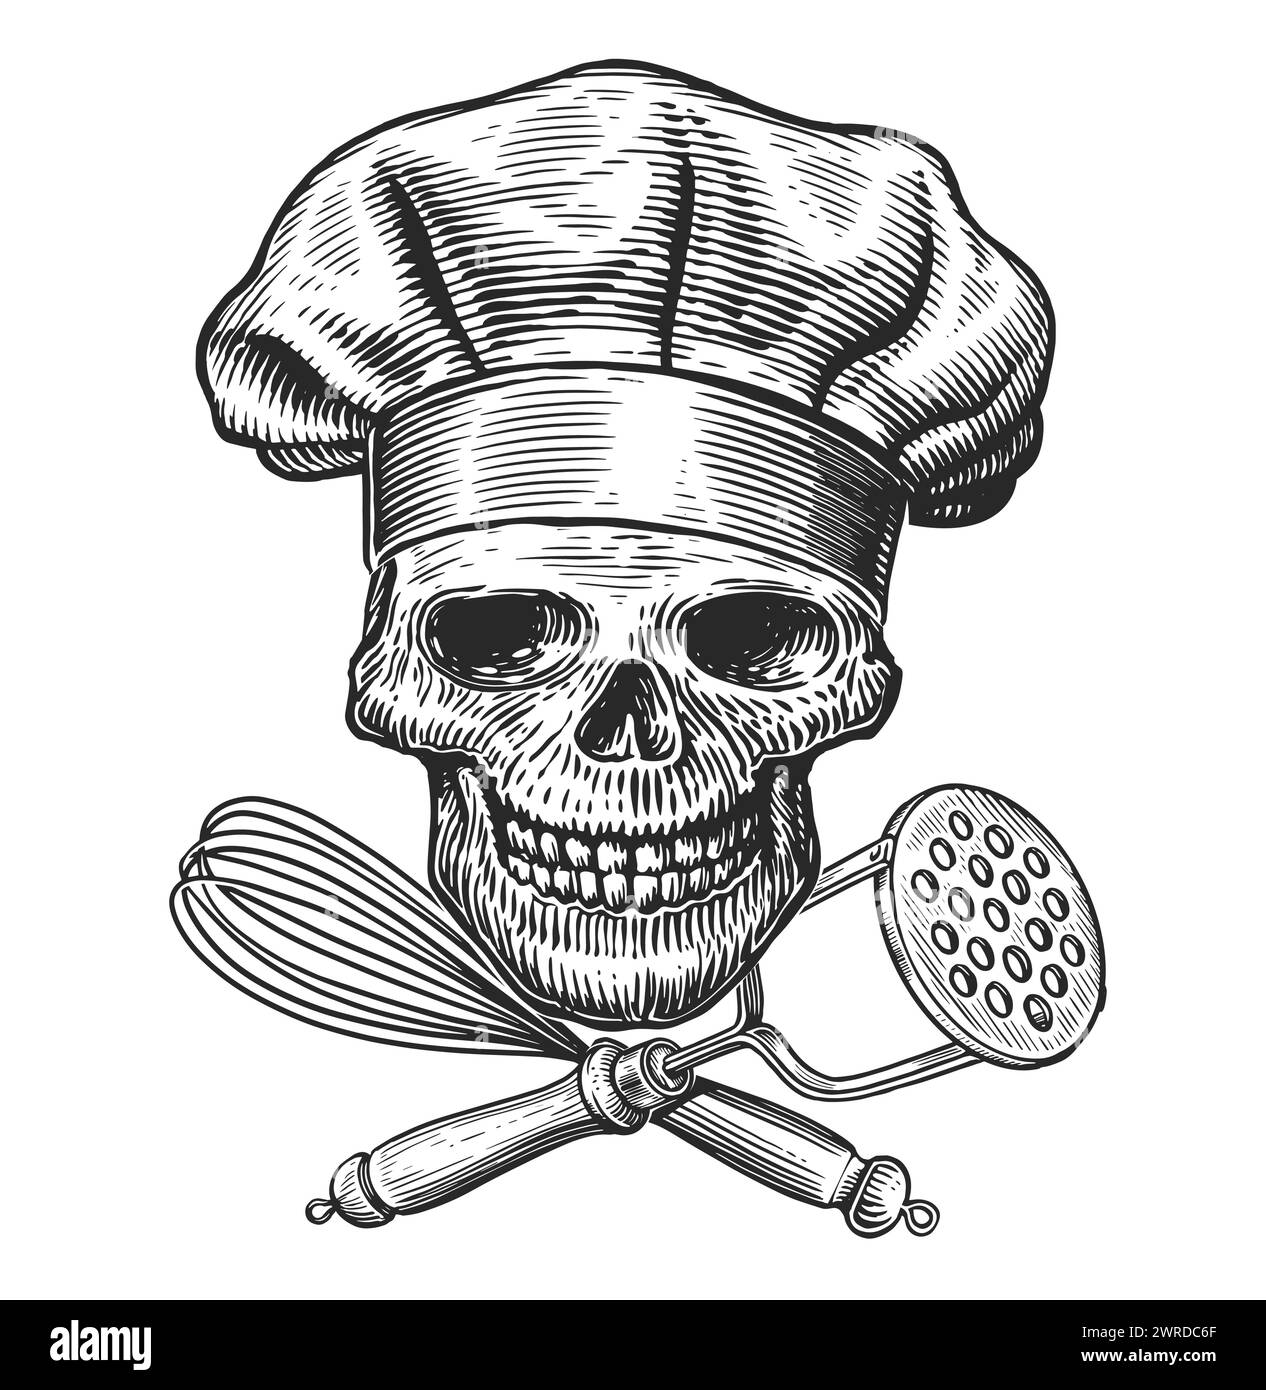 Cook skeleton vector illustration. Grinning skull in chef hat with crossed with crossed kitchen utensils Stock Vector